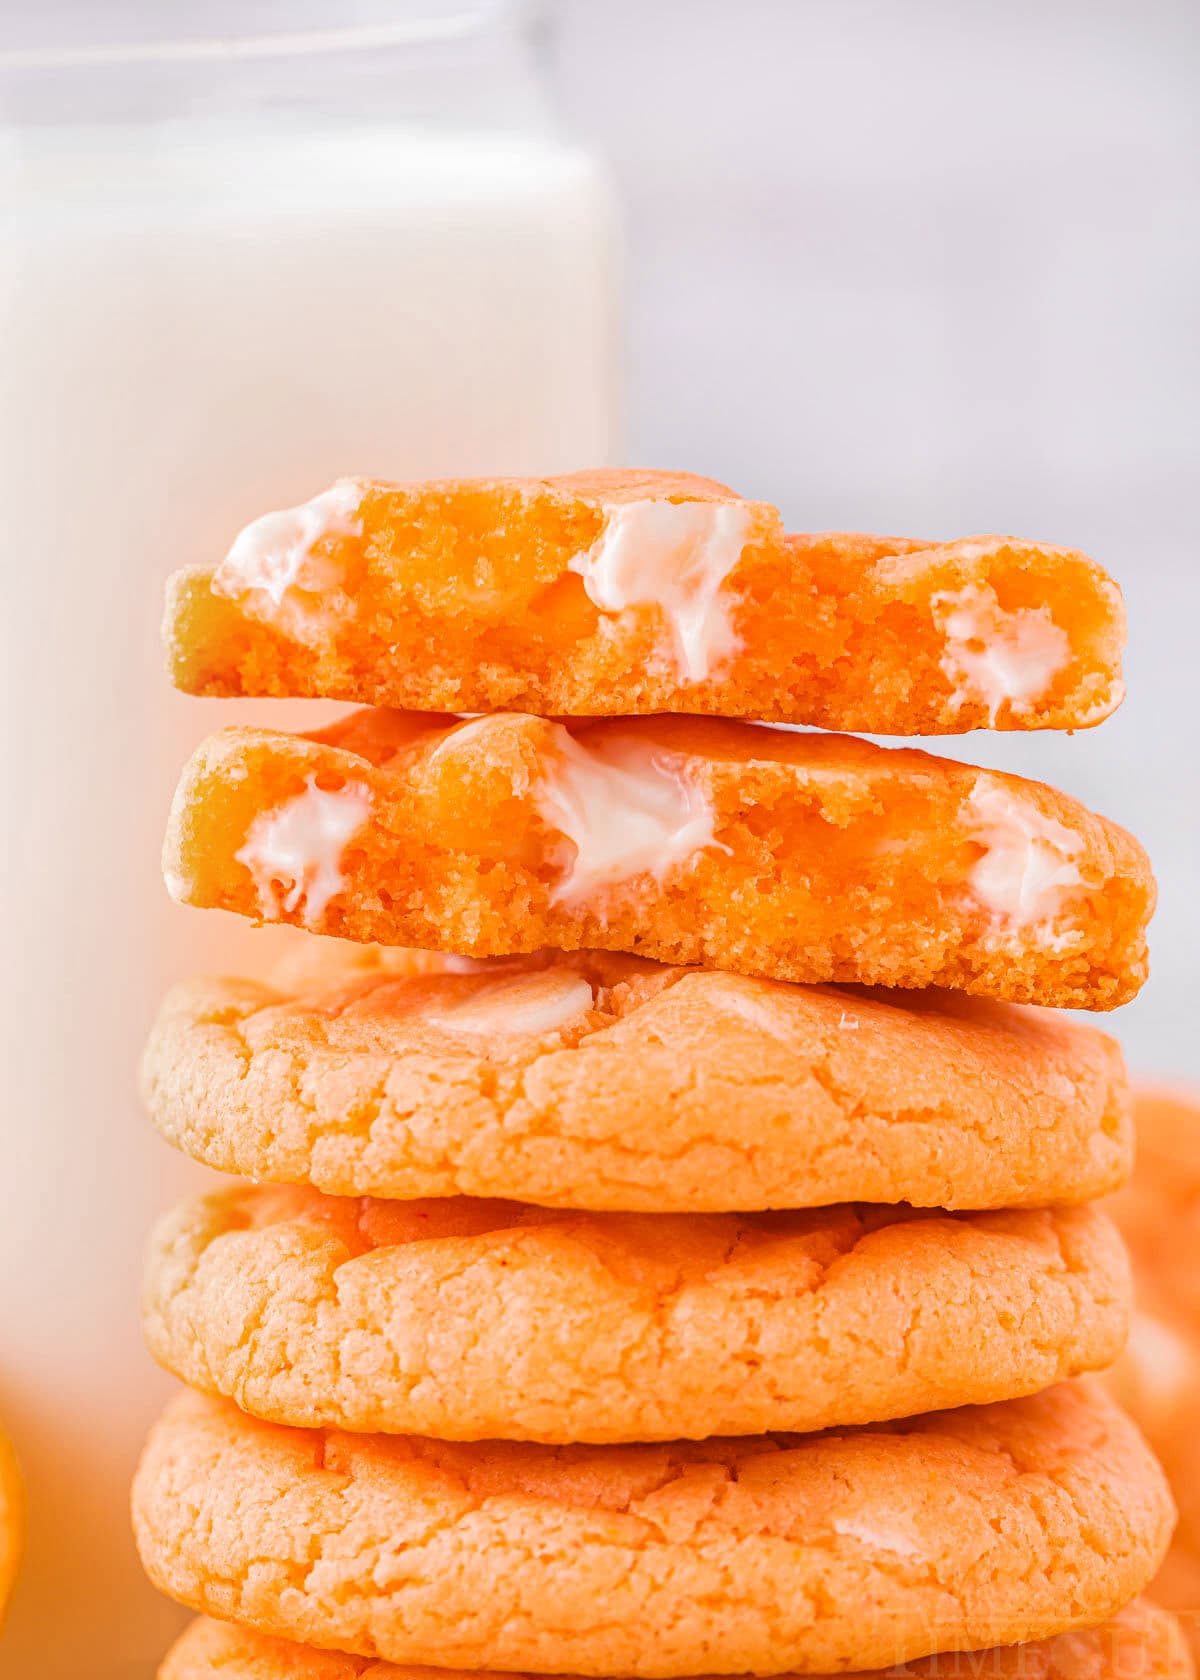 five orange cookies stacked with a glass of milk in background. top cookie is broken in half and you can see the melty white chocolate chips in the cookies.